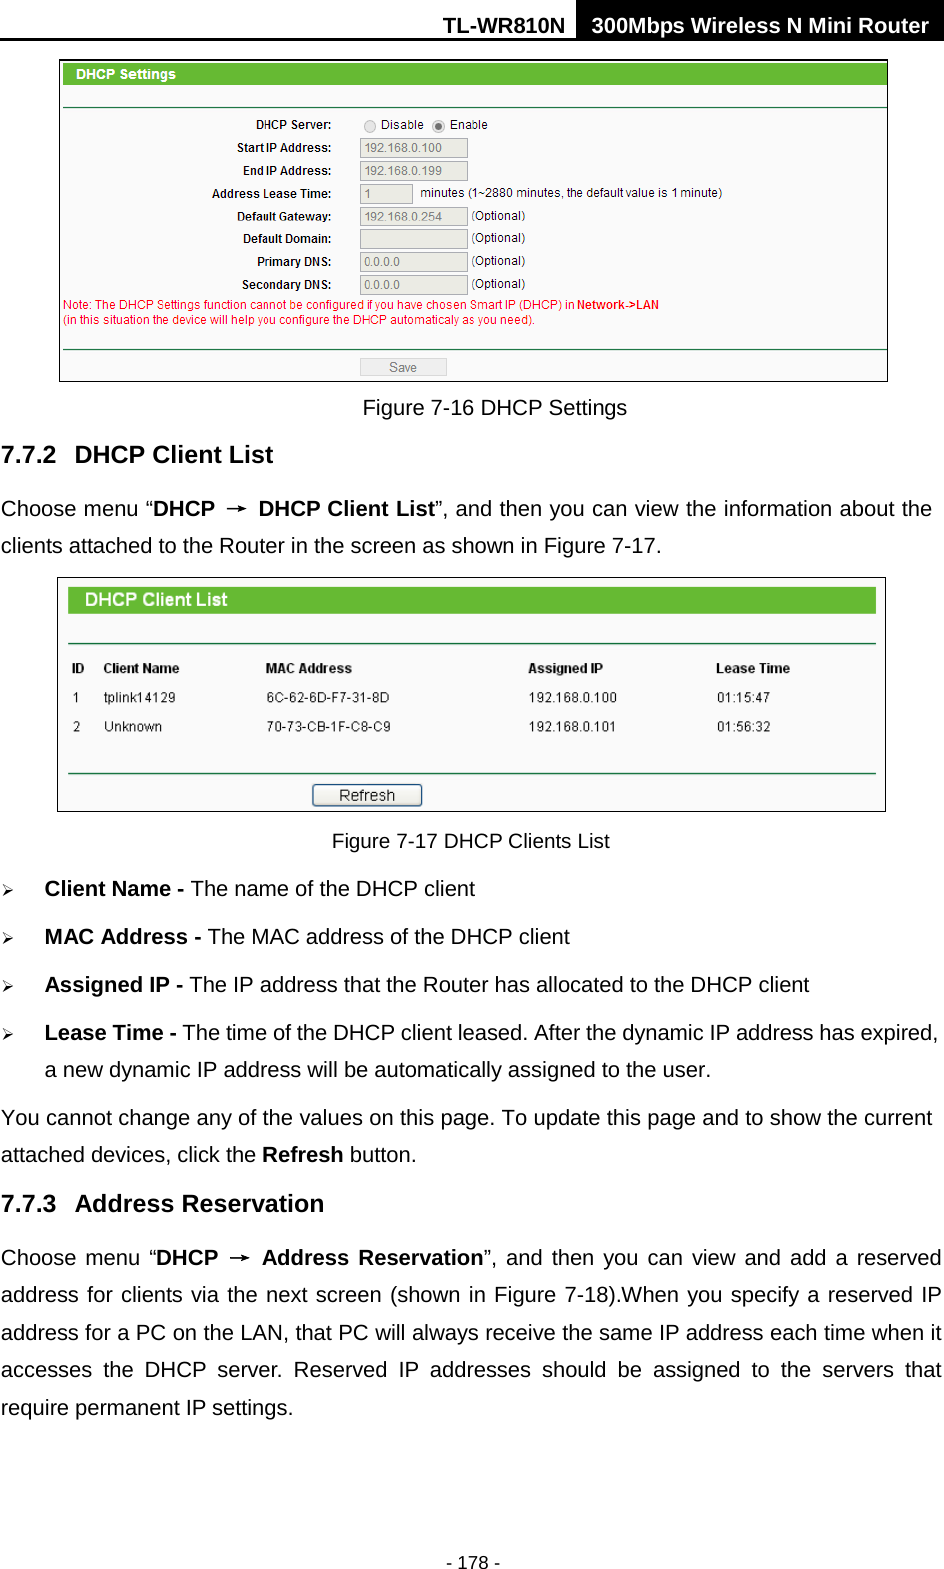 TL-WR810N 300Mbps Wireless N Mini Router  - 178 -  Figure 7-16 DHCP Settings 7.7.2 DHCP Client List Choose menu “DHCP → DHCP Client List”, and then you can view the information about the clients attached to the Router in the screen as shown in Figure 7-17.  Figure 7-17 DHCP Clients List  Client Name - The name of the DHCP client    MAC Address - The MAC address of the DHCP client    Assigned IP - The IP address that the Router has allocated to the DHCP client  Lease Time - The time of the DHCP client leased. After the dynamic IP address has expired, a new dynamic IP address will be automatically assigned to the user.     You cannot change any of the values on this page. To update this page and to show the current attached devices, click the Refresh button. 7.7.3 Address Reservation Choose menu “DHCP → Address Reservation”, and then you can view and add a reserved address for clients via the next screen (shown in Figure 7-18).When you specify a reserved IP address for a PC on the LAN, that PC will always receive the same IP address each time when it accesses the DHCP server. Reserved IP addresses should be assigned to the  servers  that require permanent IP settings.   